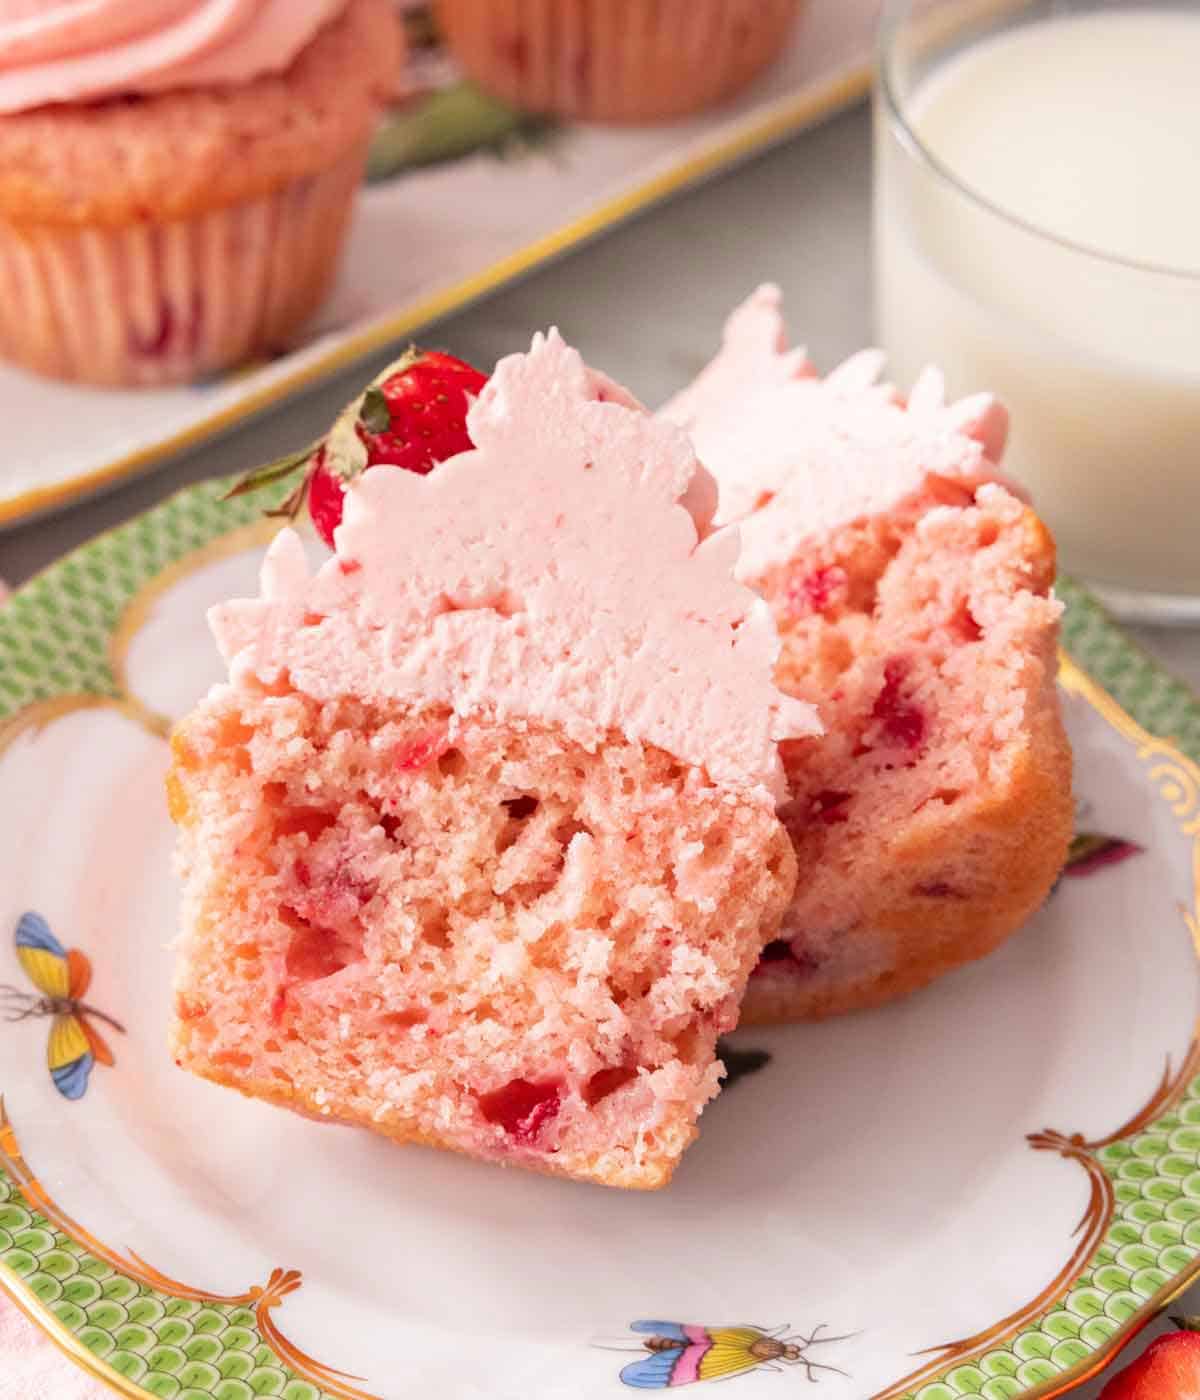 A strawberry cupcake cut in half on a plate.